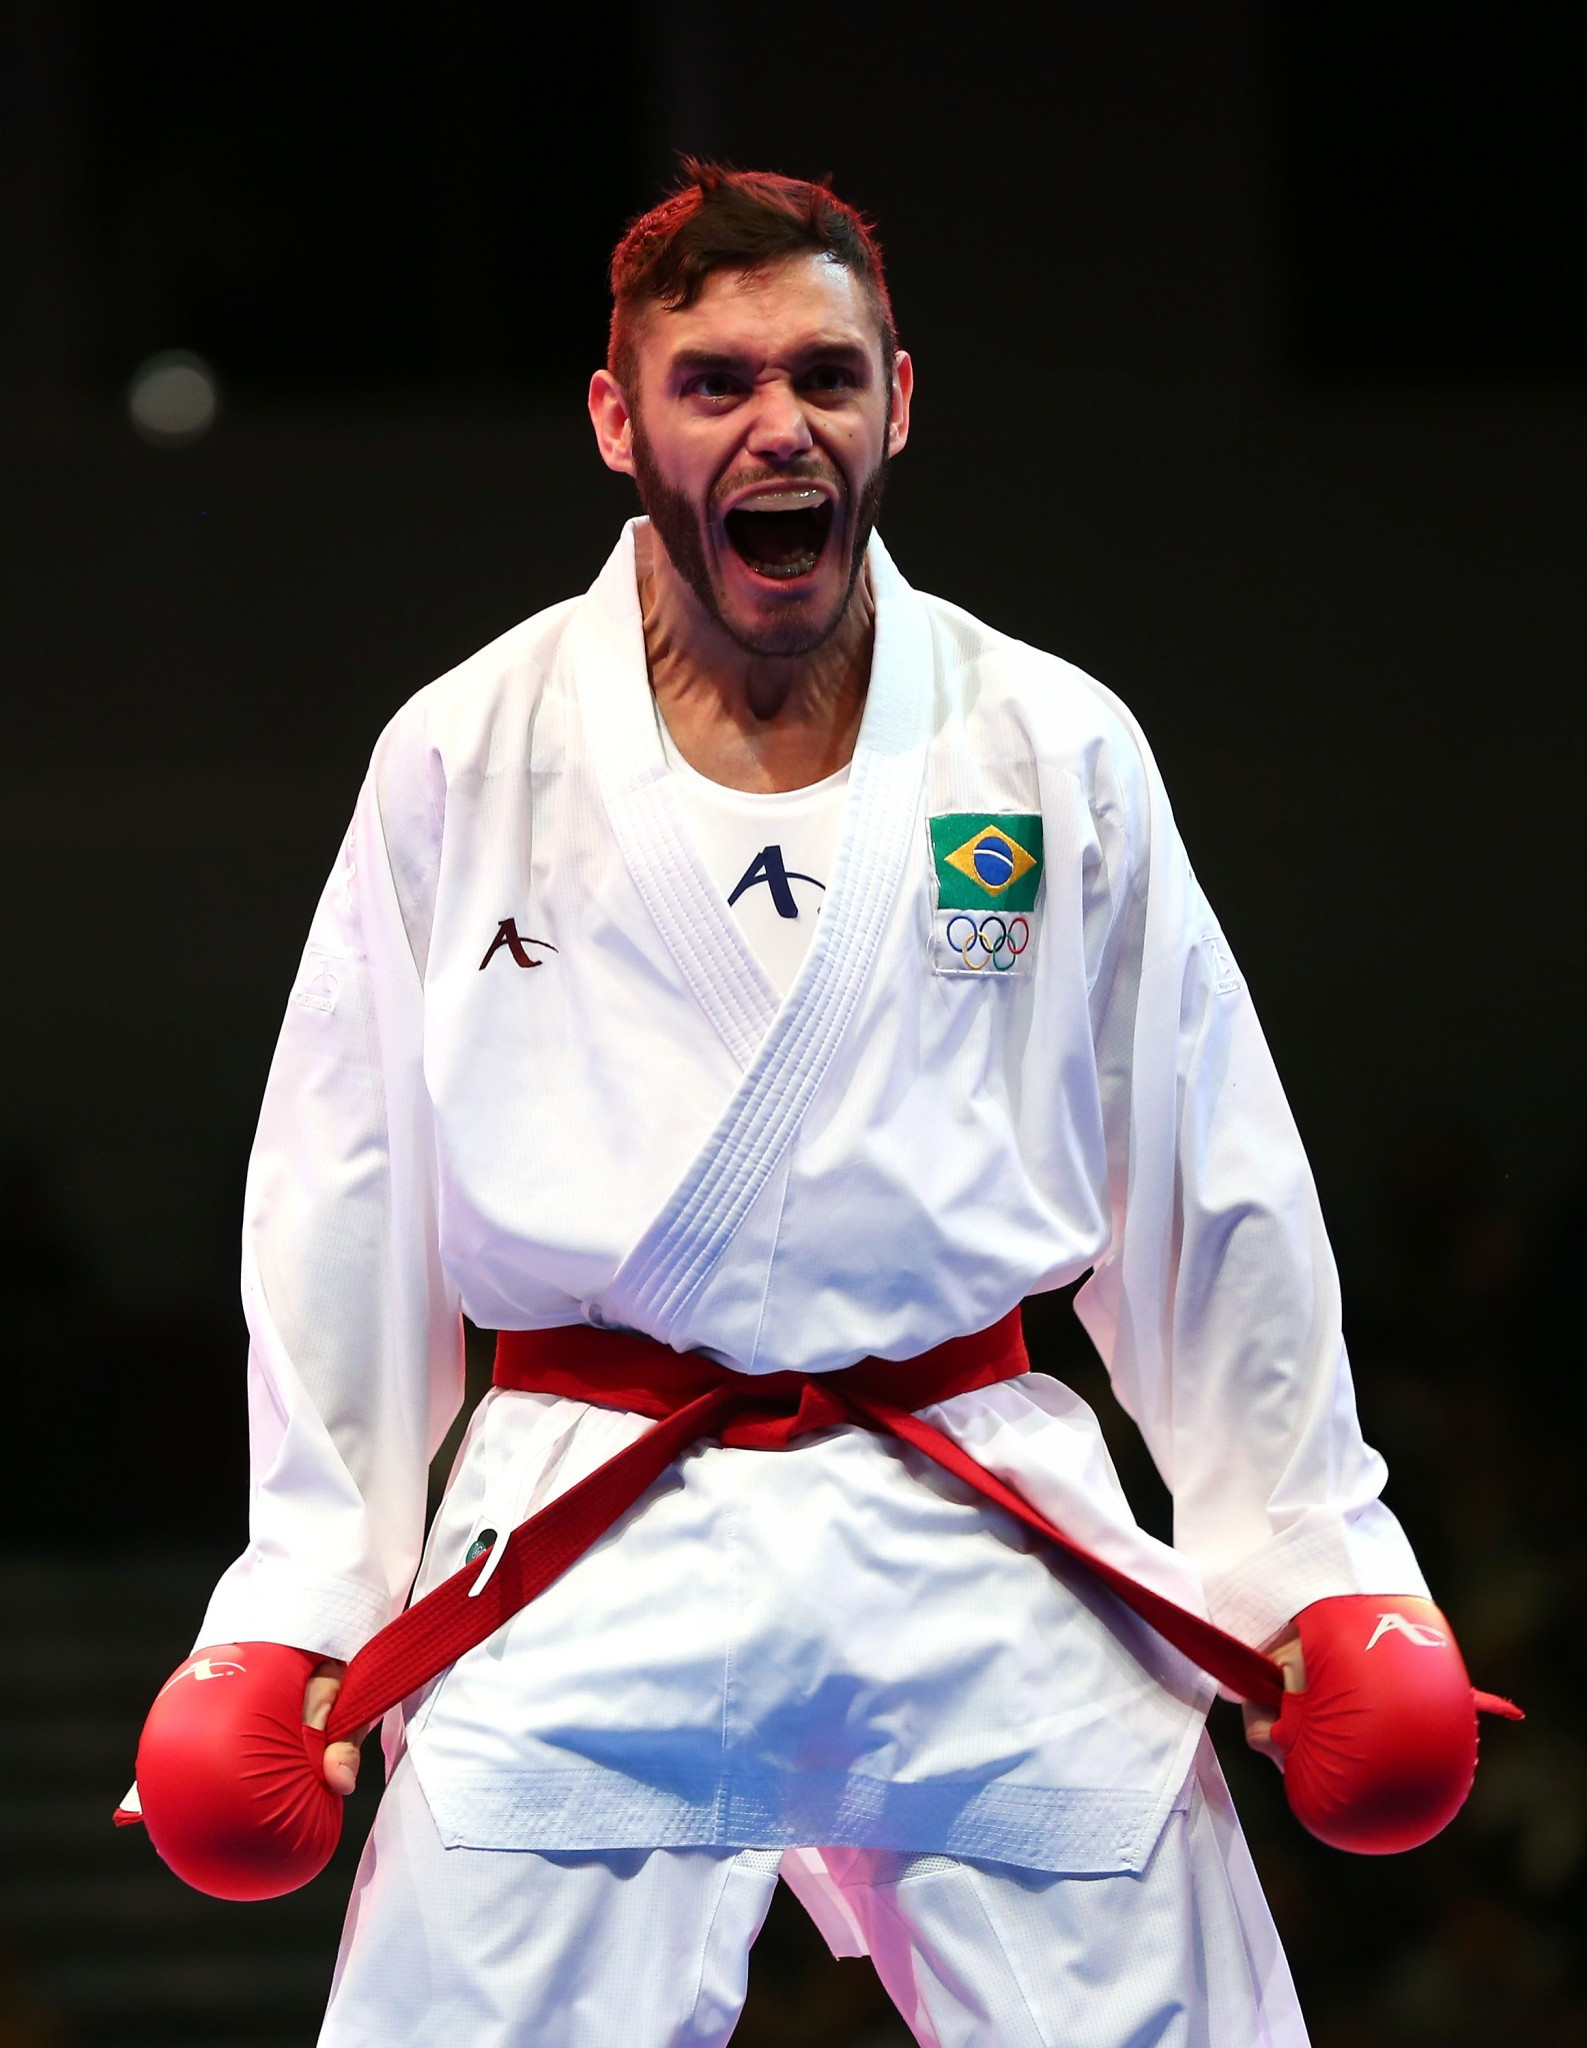 Douglas Brose qualified for the final of the men's under-60kg kumite event ©Getty Images